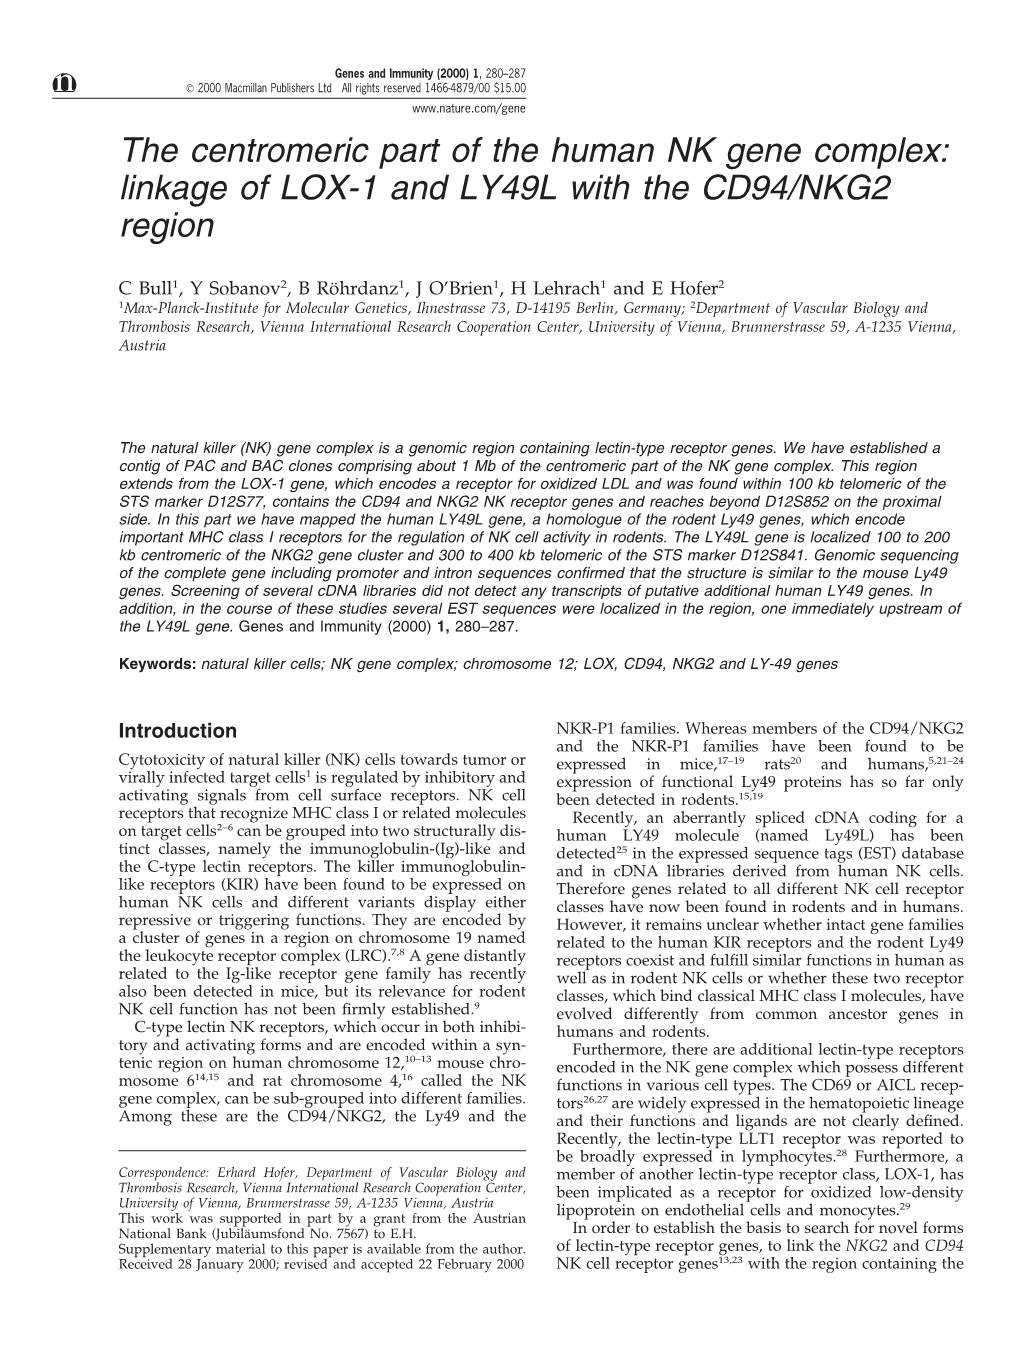 The Centromeric Part of the Human NK Gene Complex: Linkage of LOX-1 and LY49L with the CD94/NKG2 Region